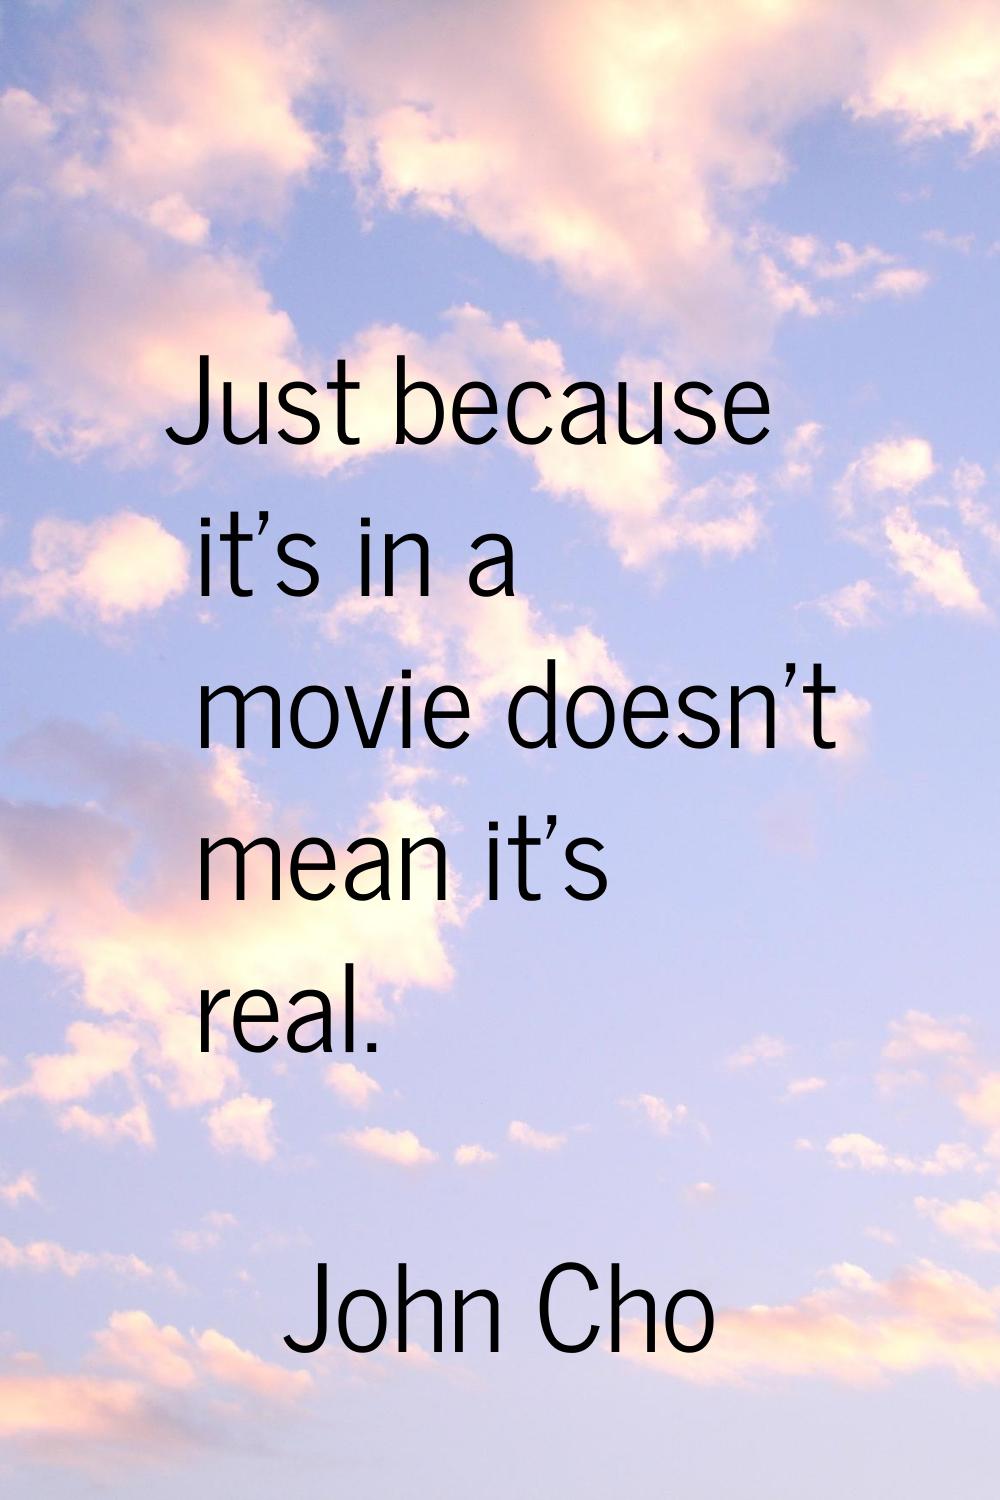 Just because it's in a movie doesn't mean it's real.